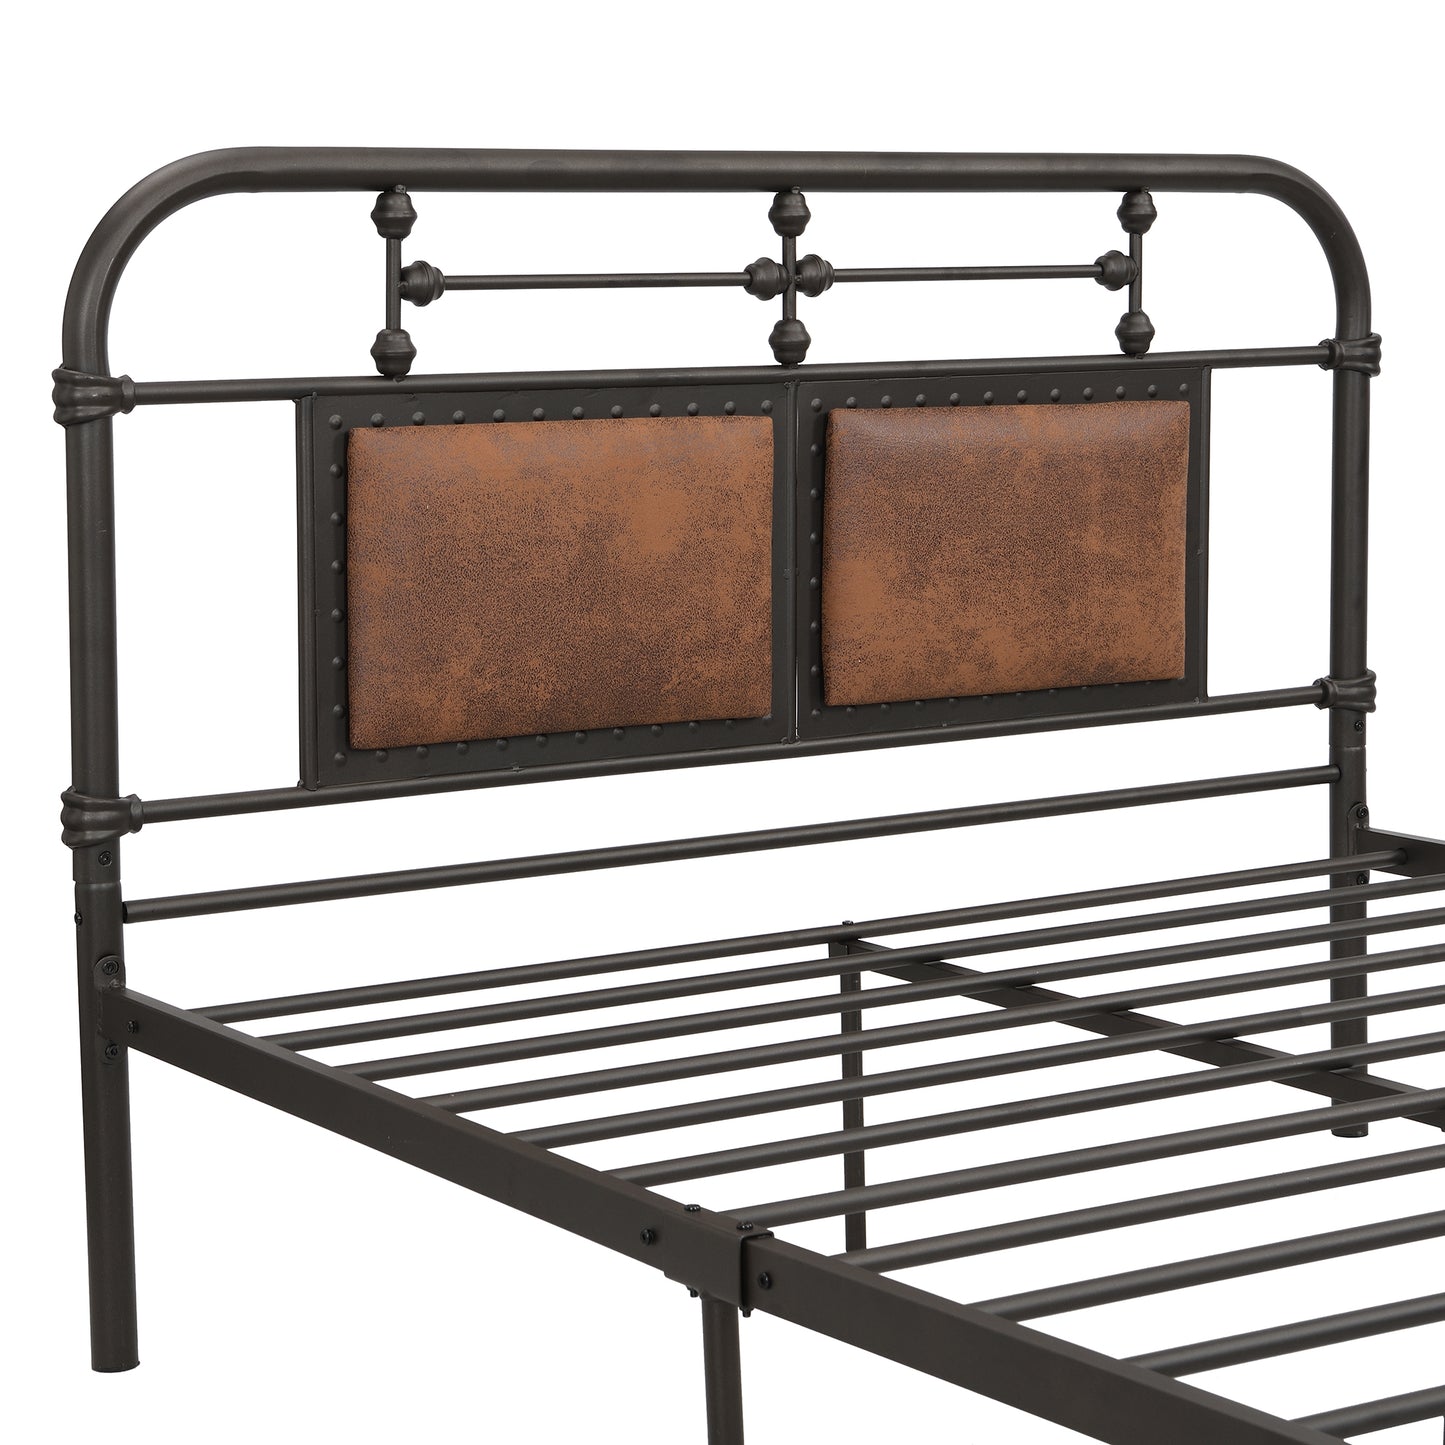 Black Iron Platform Bed Frame Full Size with Vintage Headboard and Footboard, Metal Full Bed Frame Mattress Foundation with 530LBS Load Capacity, No Box Spring Required